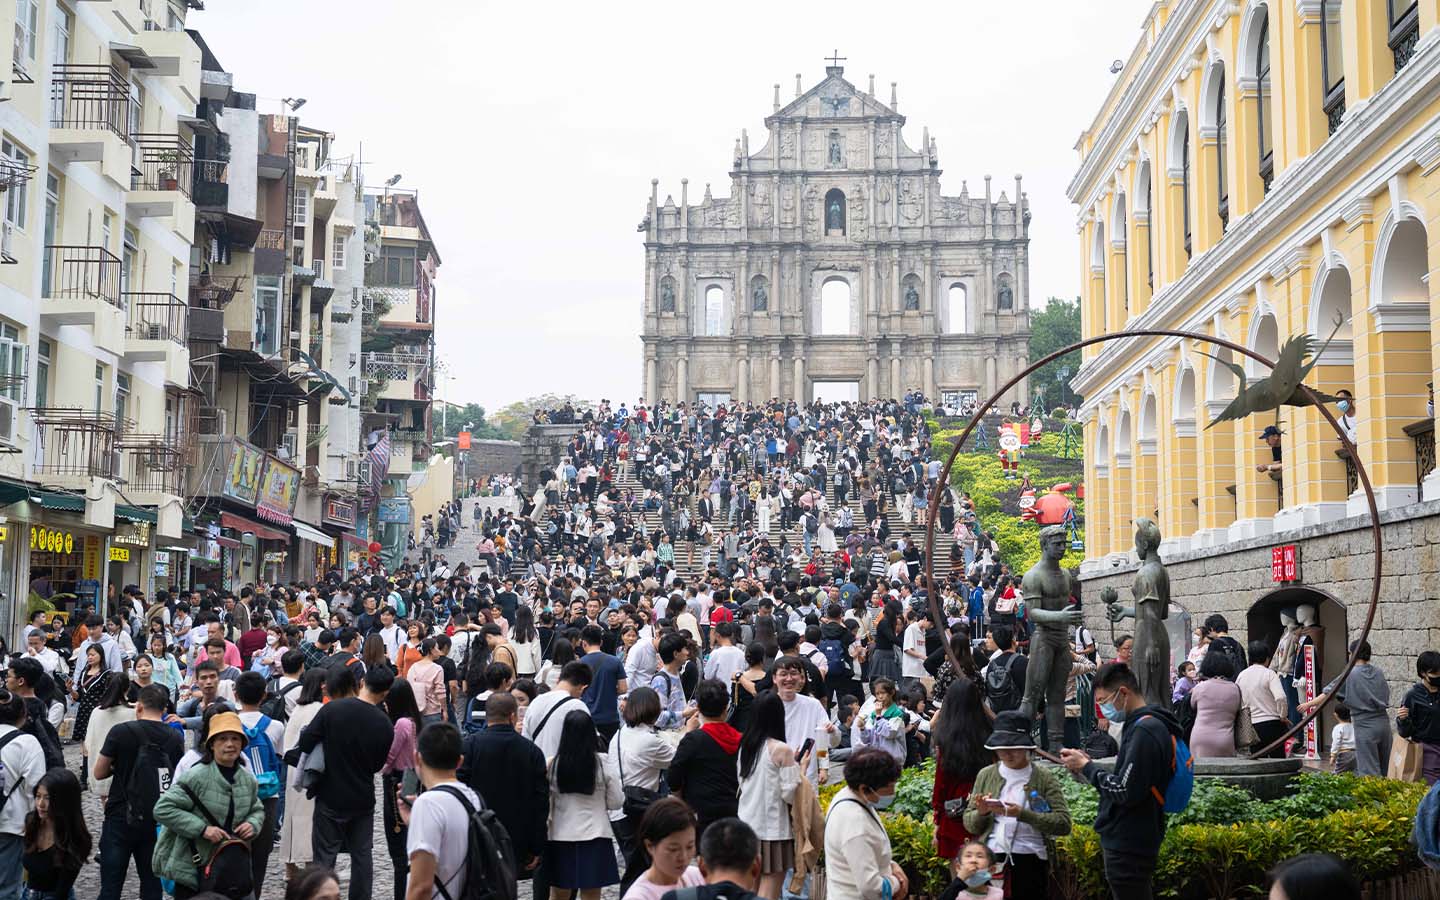 Are there too many tourists coming to Macao?